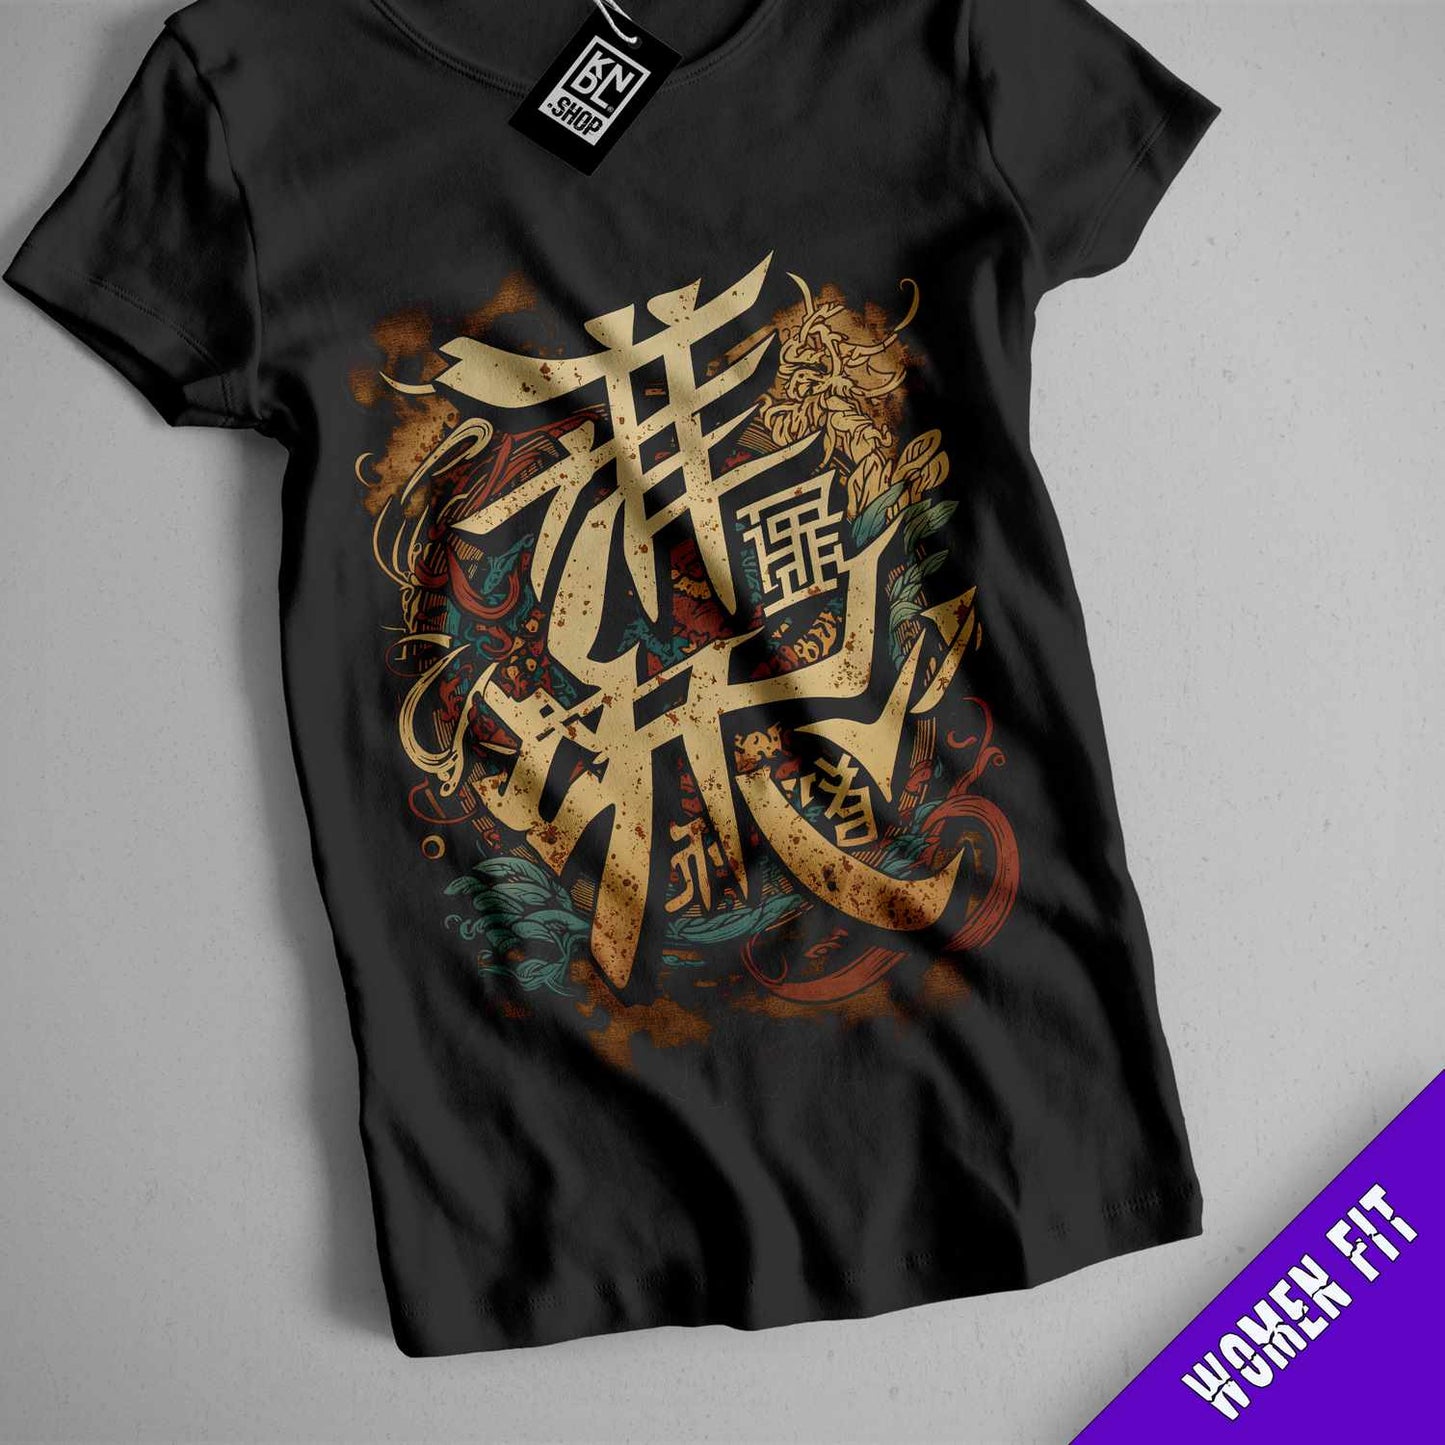 a t - shirt with a dragon and chinese characters on it